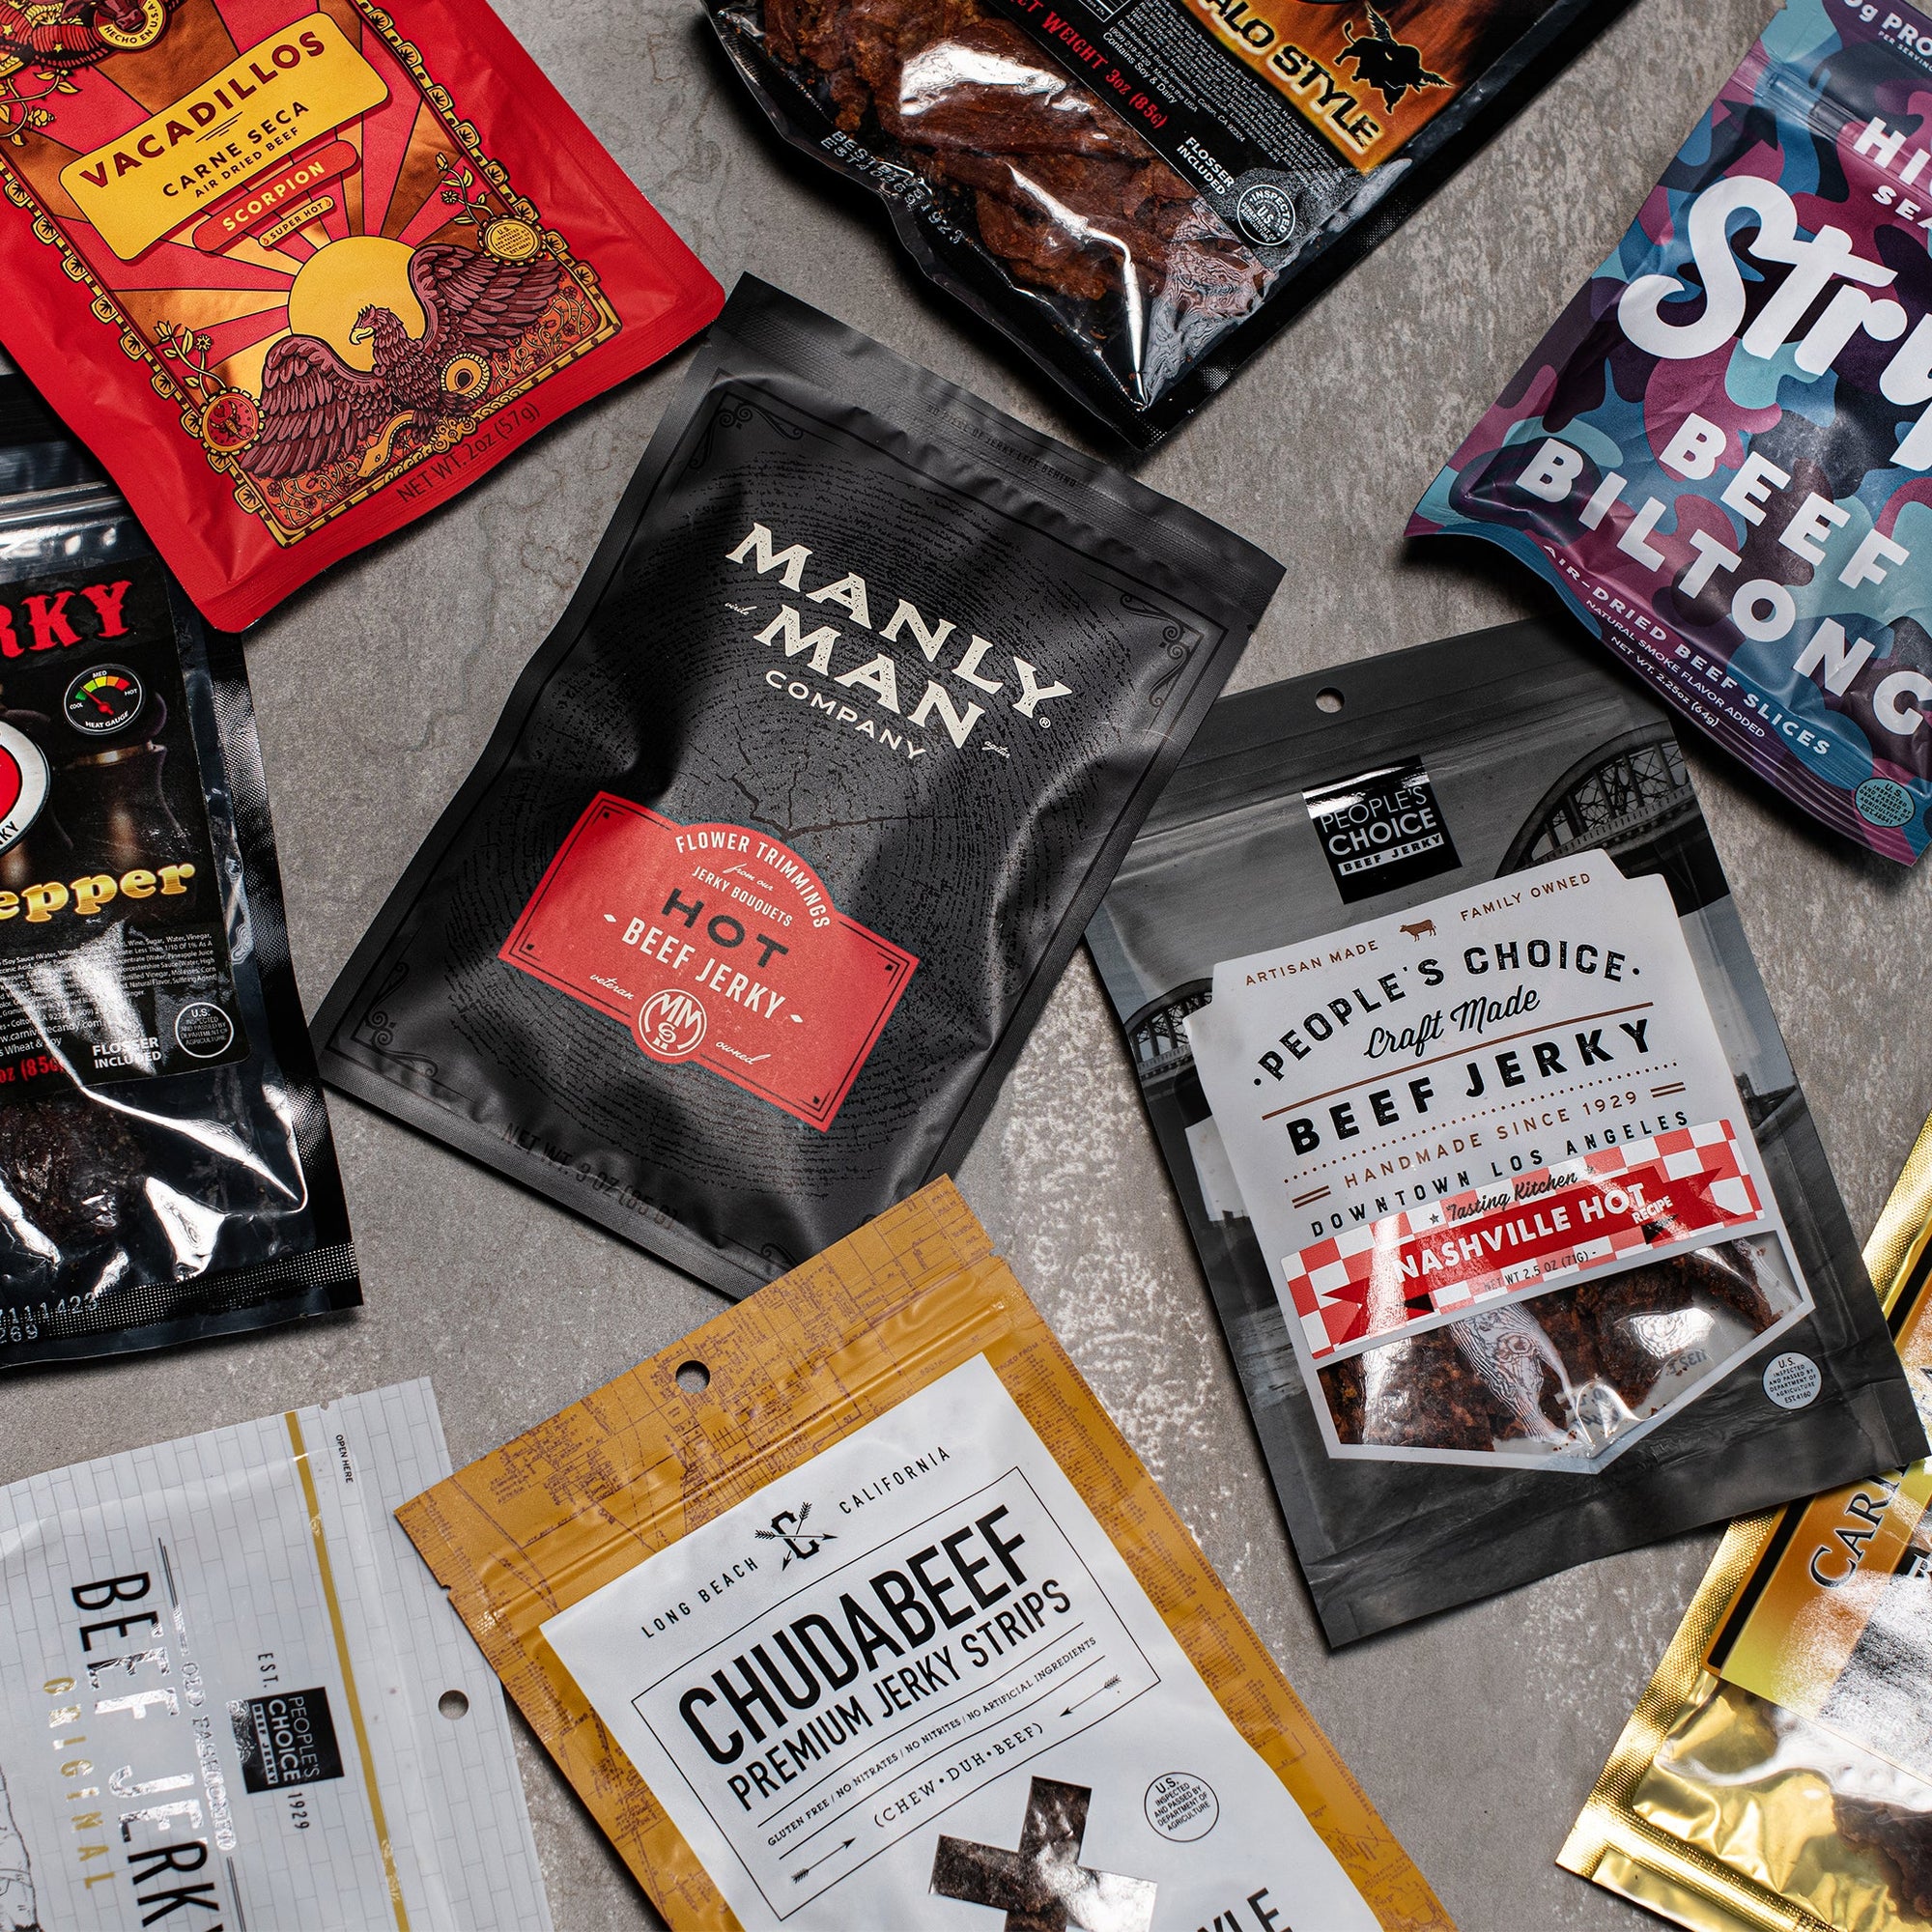 Manly Man Co. Booze Infused Jerky Tactical X-mas Stocking Kit